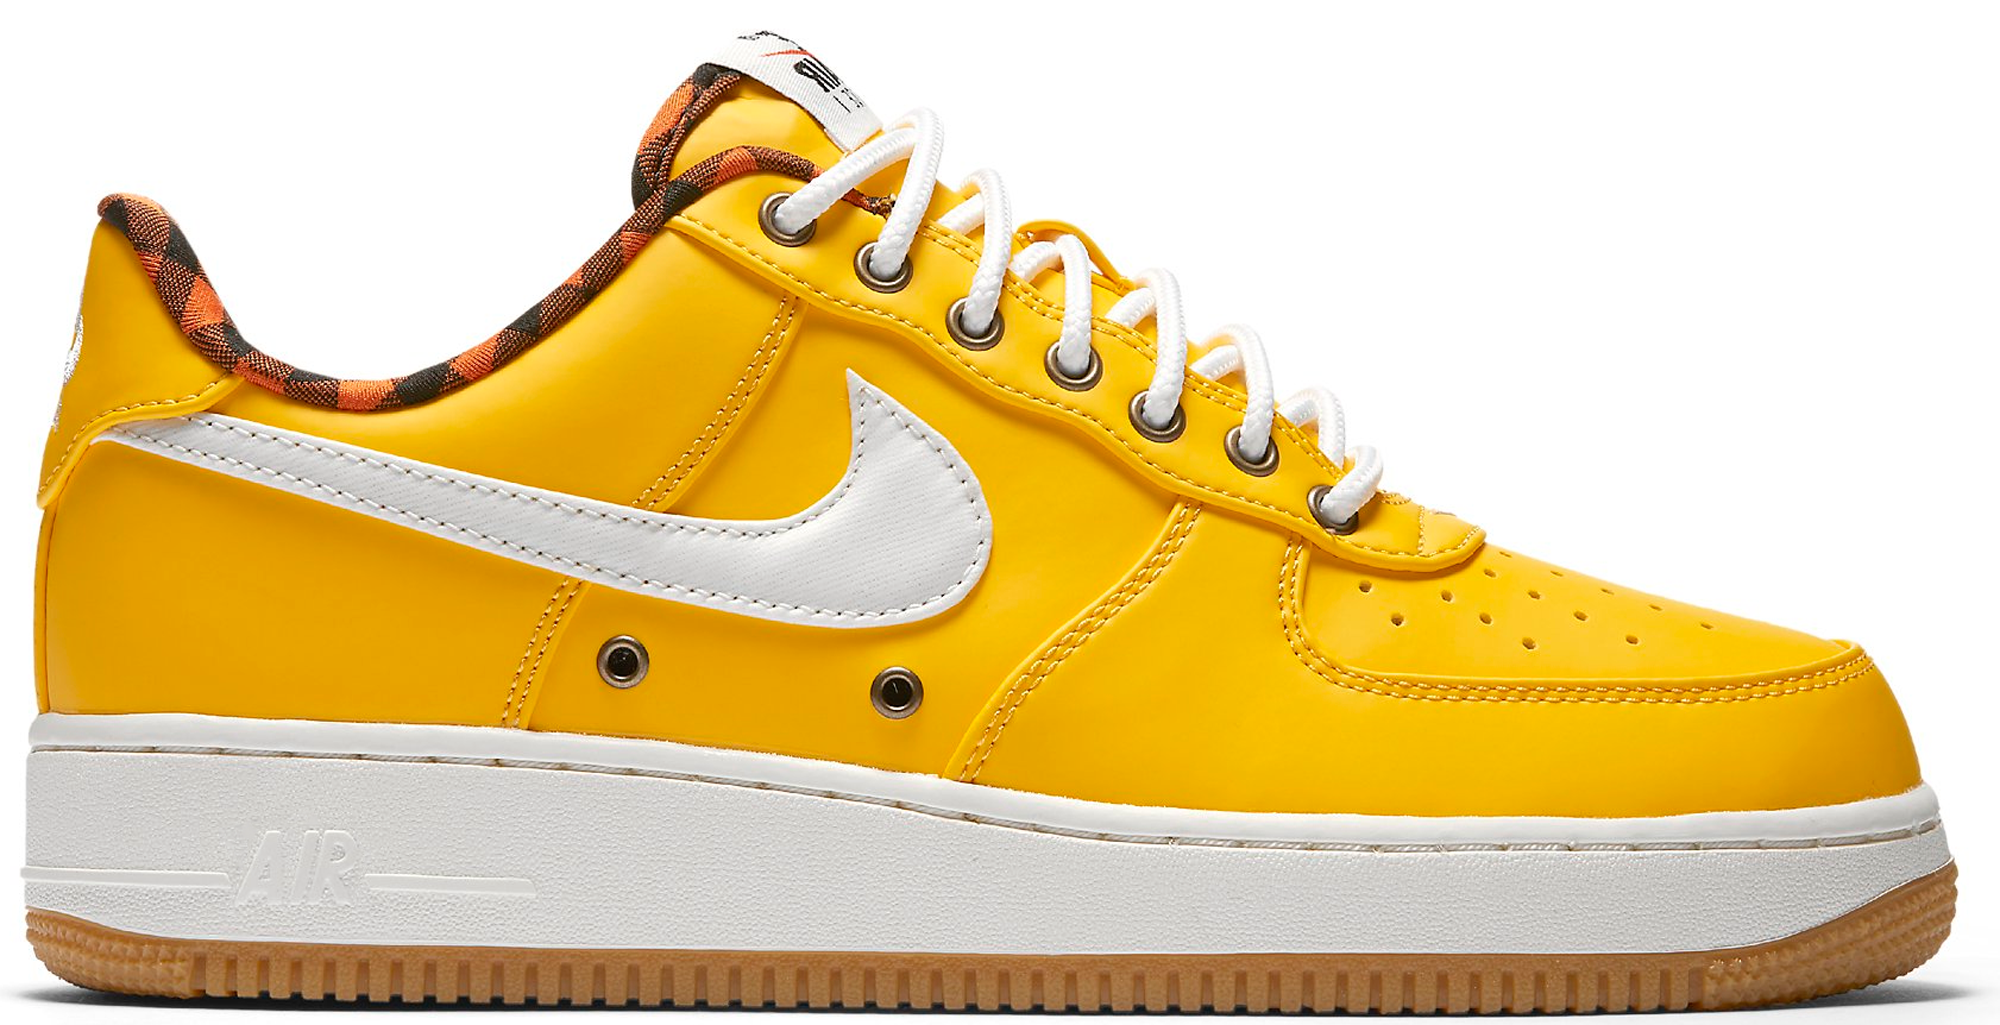 Nike Air Force 1 Low Varsity Maize 